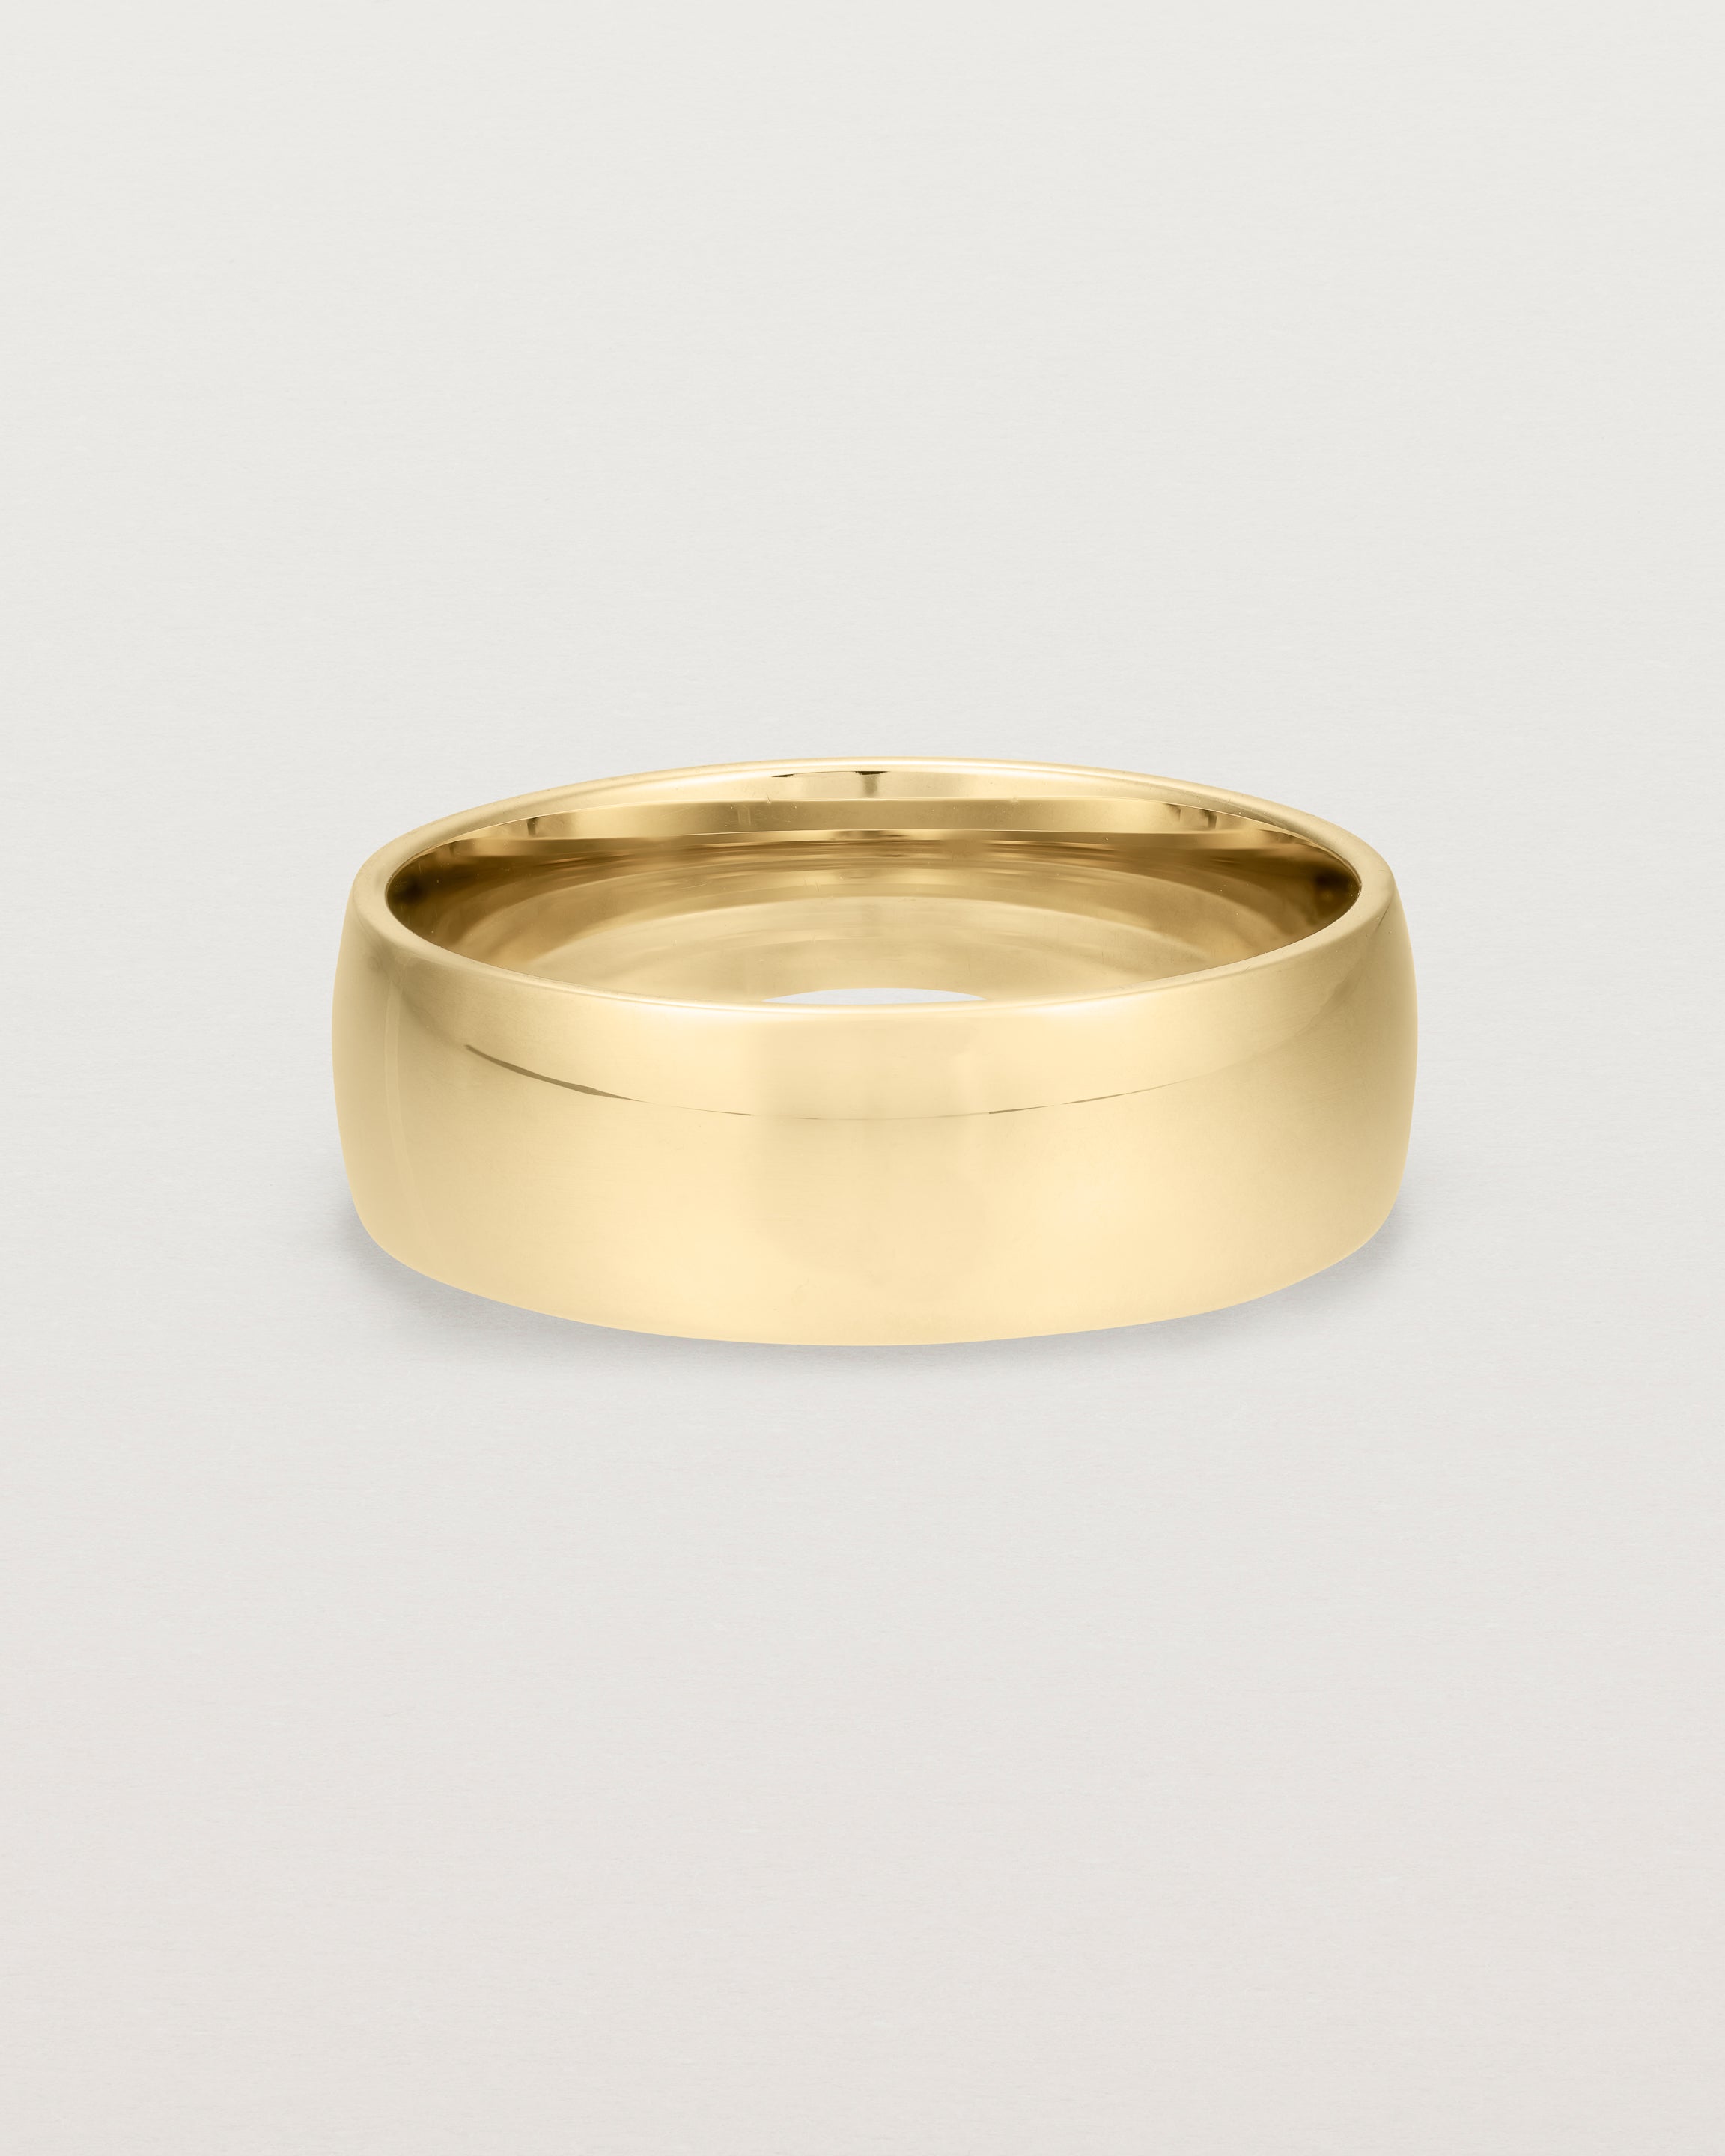 The front view of a heavy 7mm wedding band in yellow gold